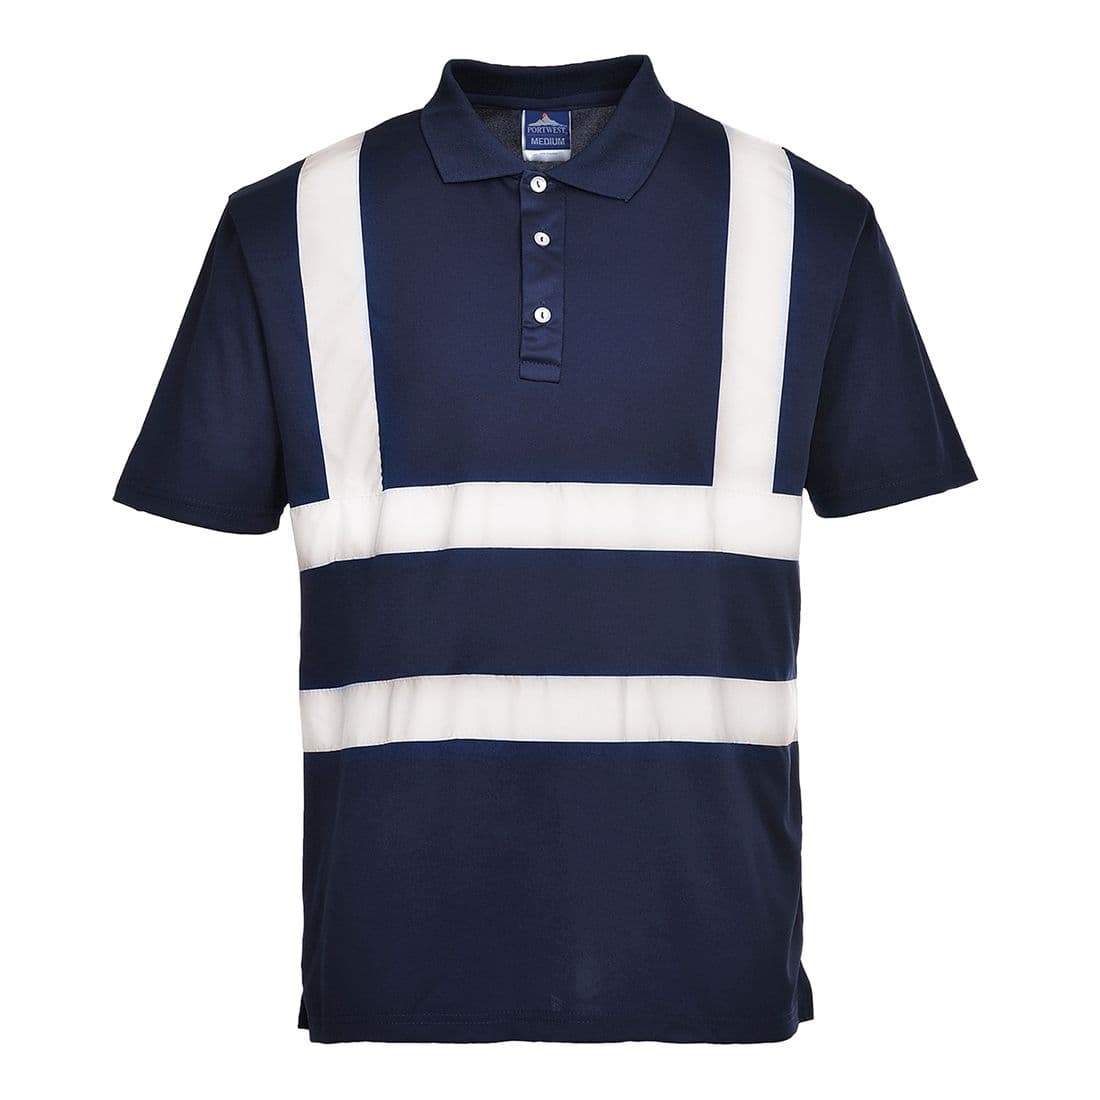 Portwest Iona Poloshirt – Navy – XL – PPE – Taft Safety Store